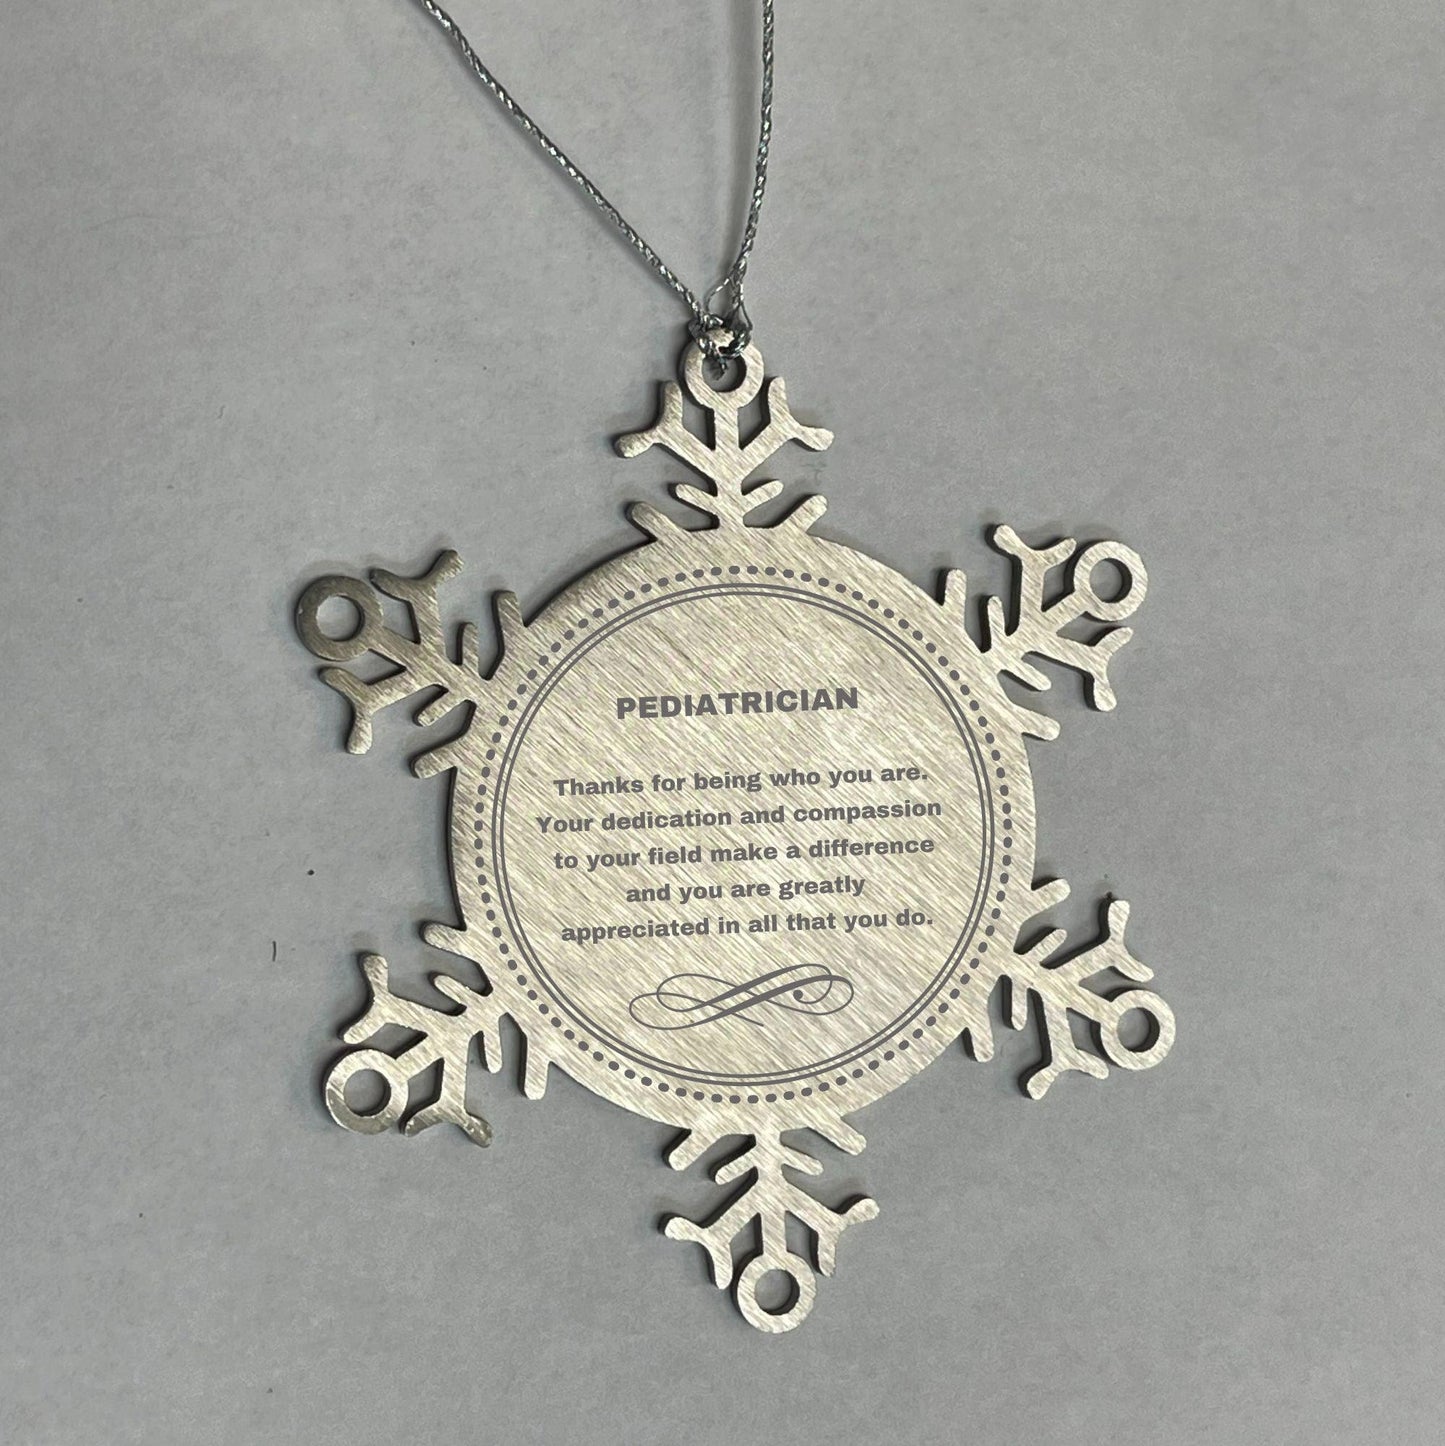 Pediatrician Snowflake Ornament - Thanks for being who you are - Birthday Christmas Jewelry Gifts Coworkers Colleague Boss - Mallard Moon Gift Shop